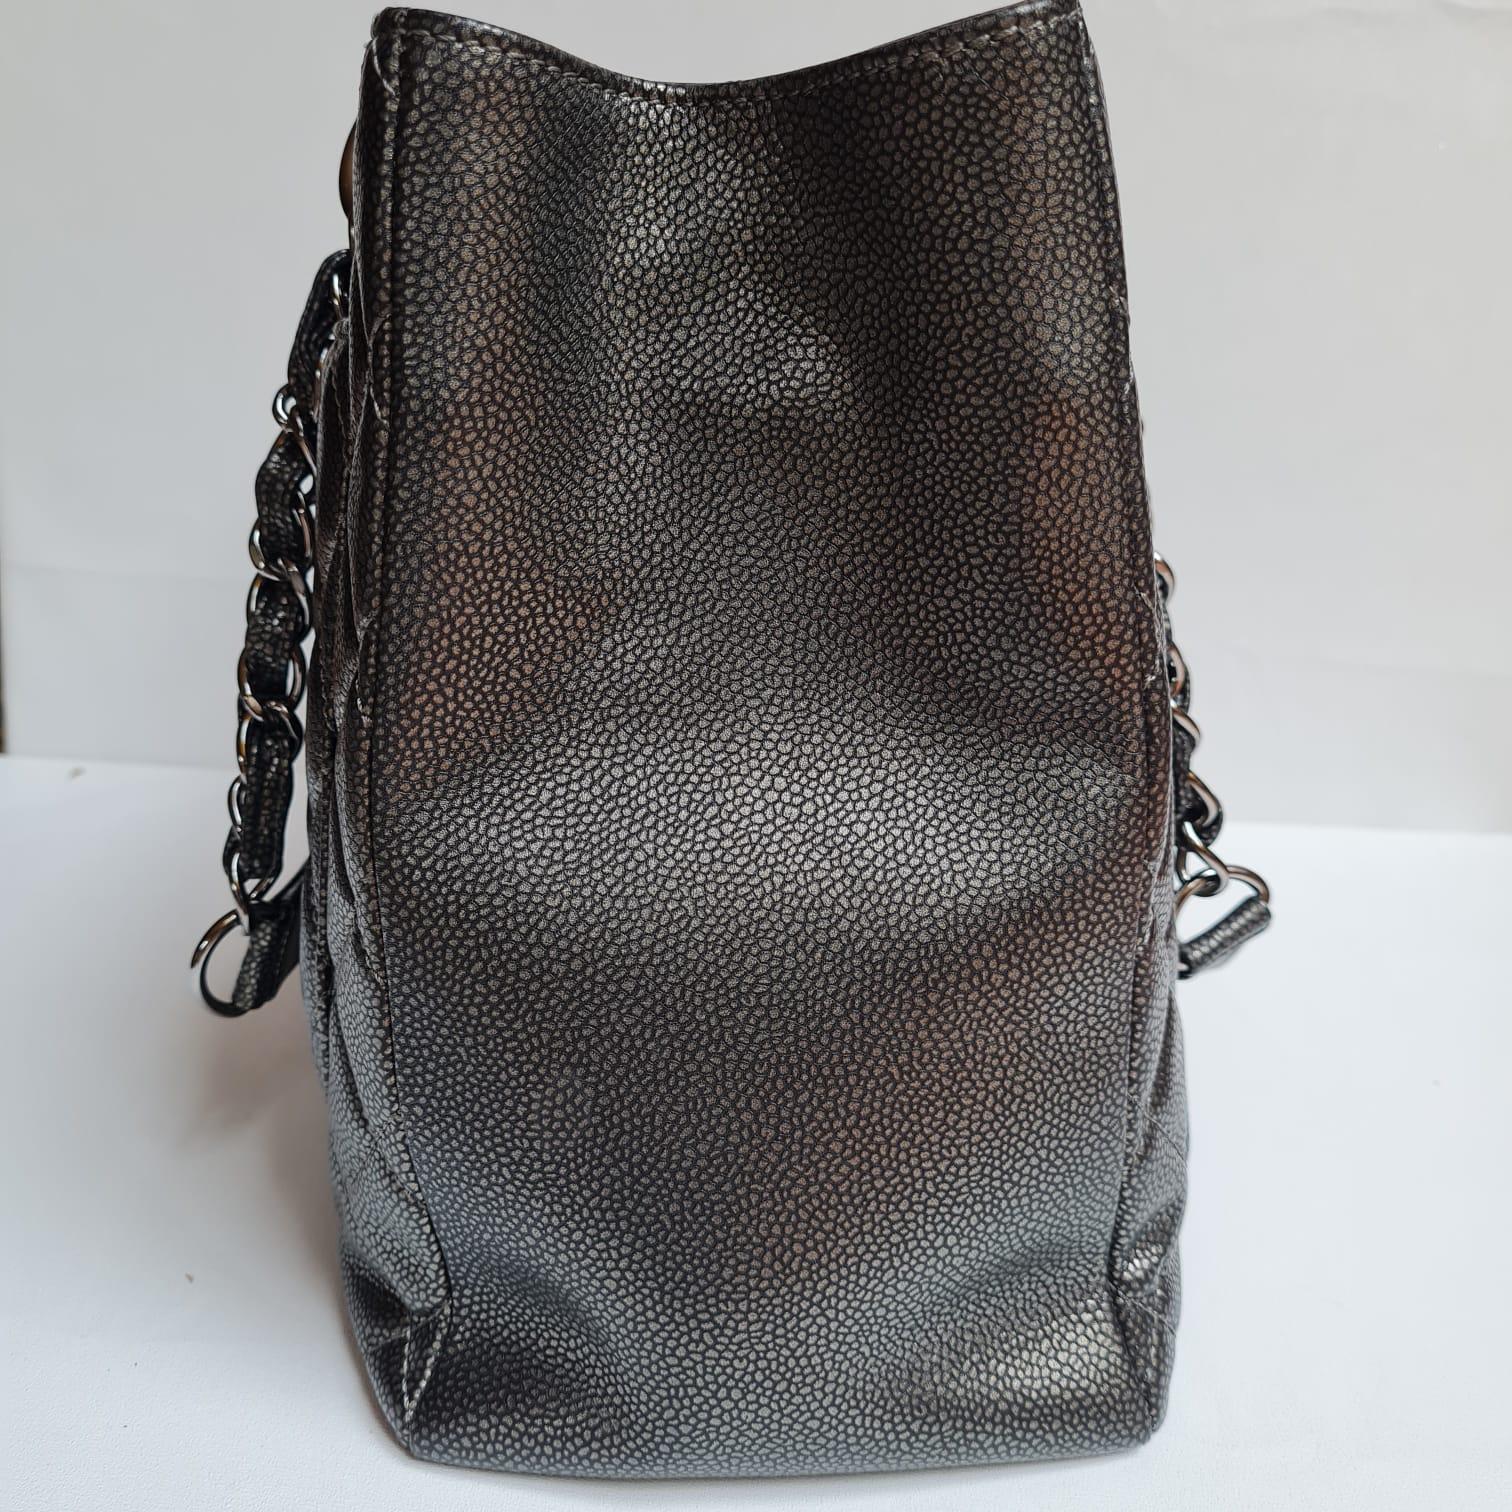 Classic grand shopping tote in gunmetal caviar leather. Item is in great condition, but the outside leather has slightly caved in due to storage. Minor rubbing on the corners. Item comes with no inclusion. Item series #15.